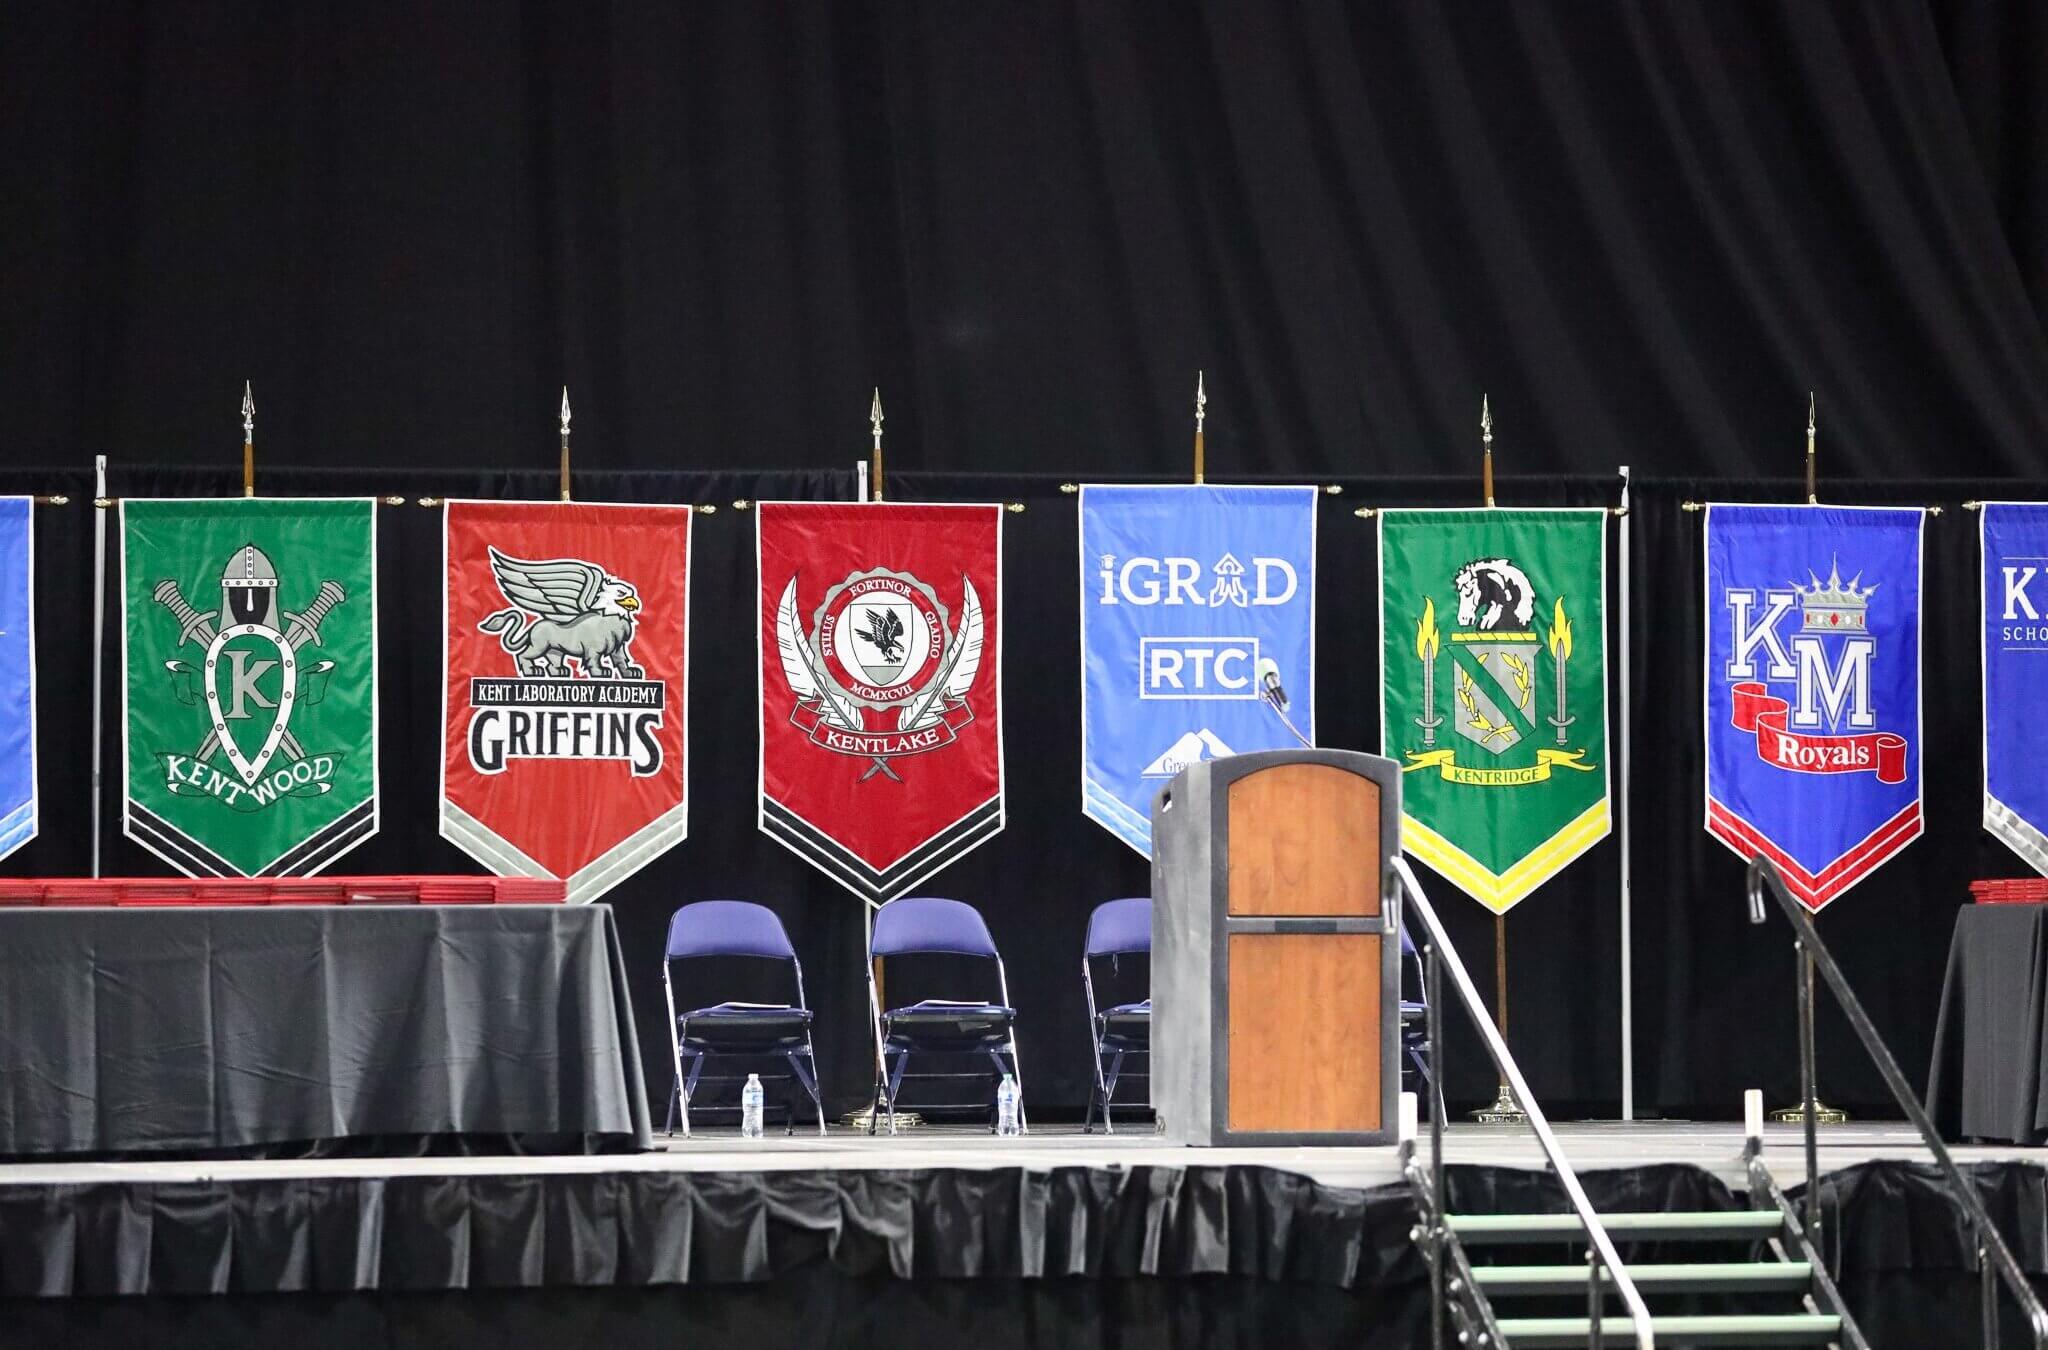 Banners featuring schools from the Kent School District are displayed on stage during a graduation ceremony last spring. An official with the district said this week that school libraries might be required to offer books disputing the Holocaust.